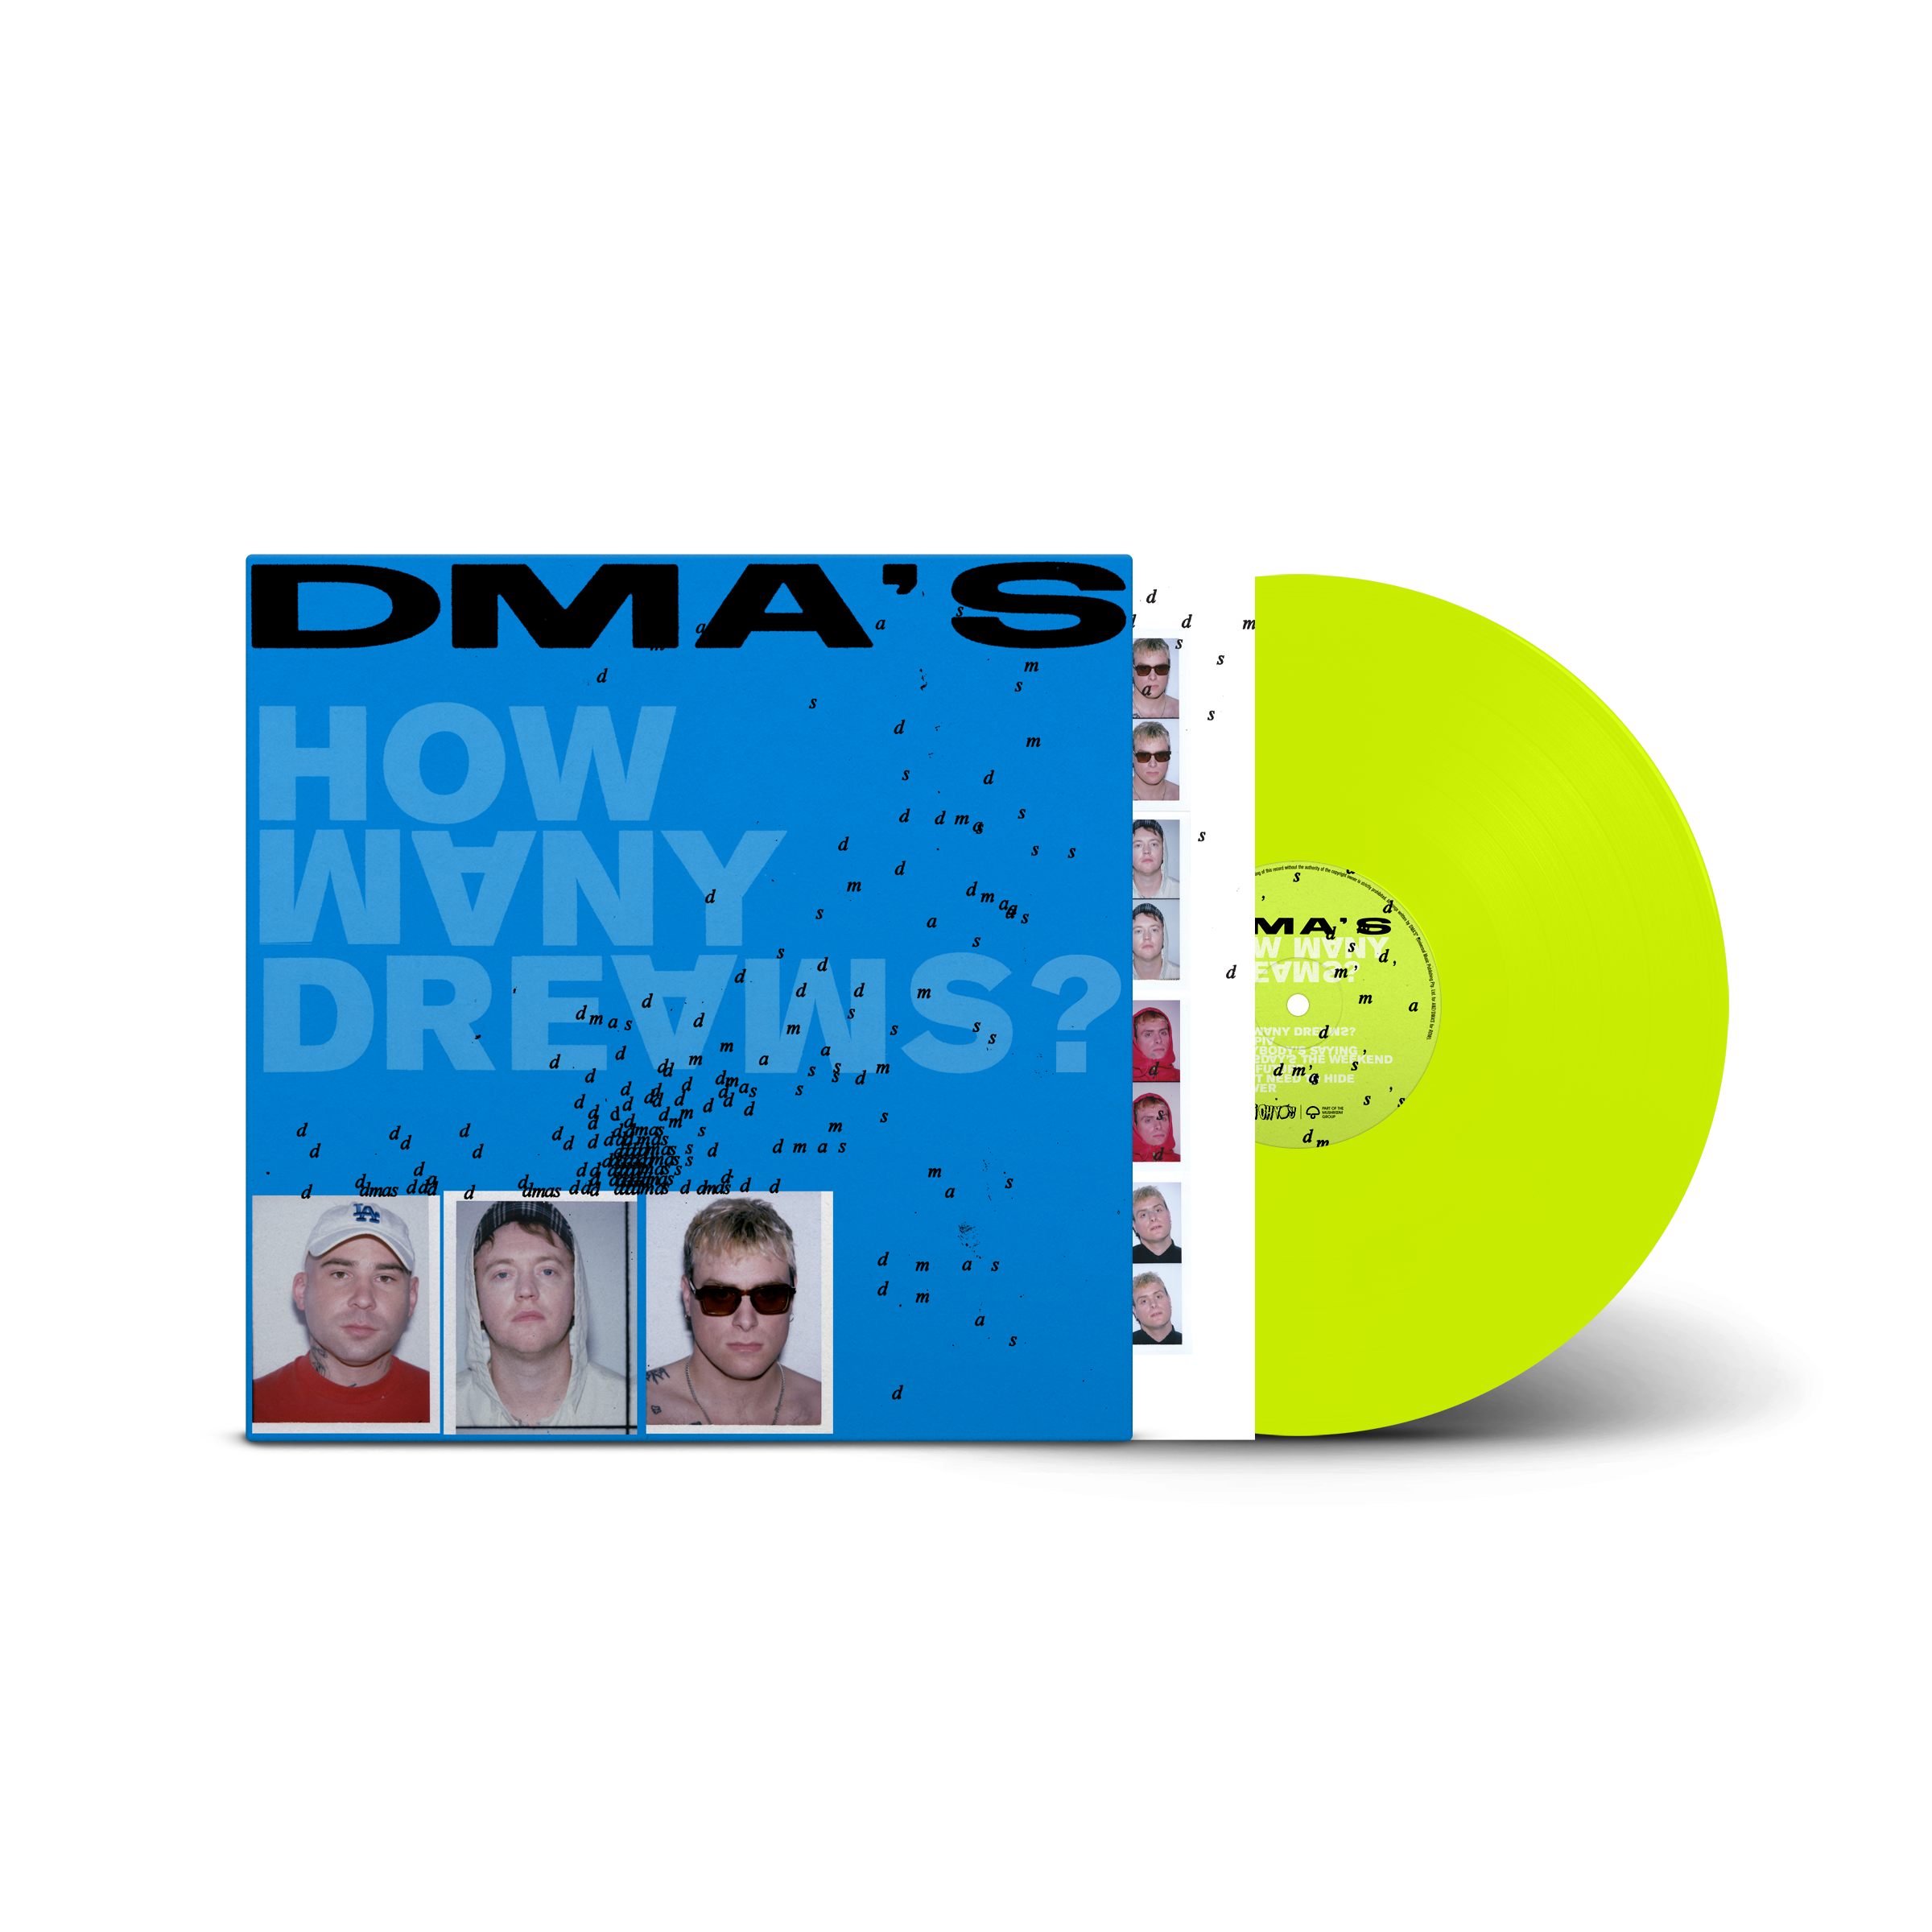 How Many Dreams? Neon Yellow Vinyl LP With Alternate Artwork & Signed Print [Exclusive Limited Copies]